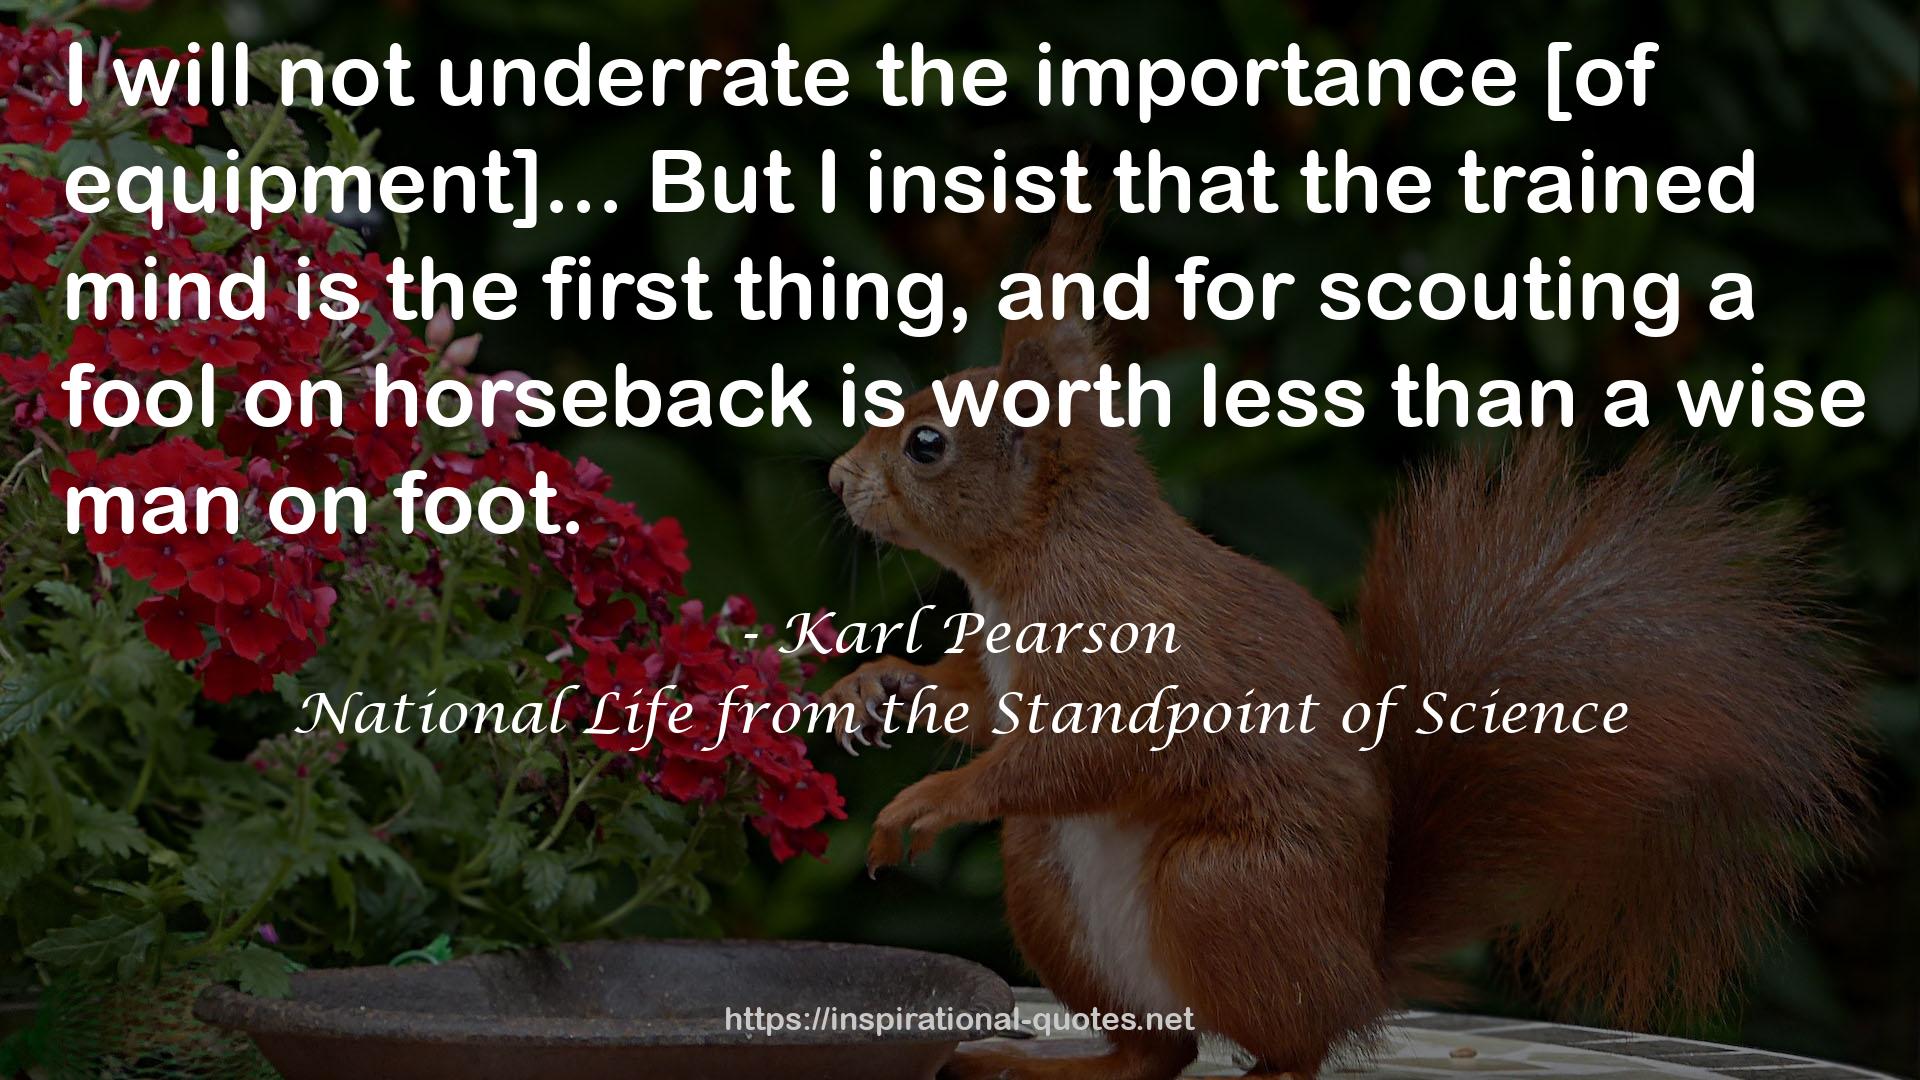 National Life from the Standpoint of Science QUOTES